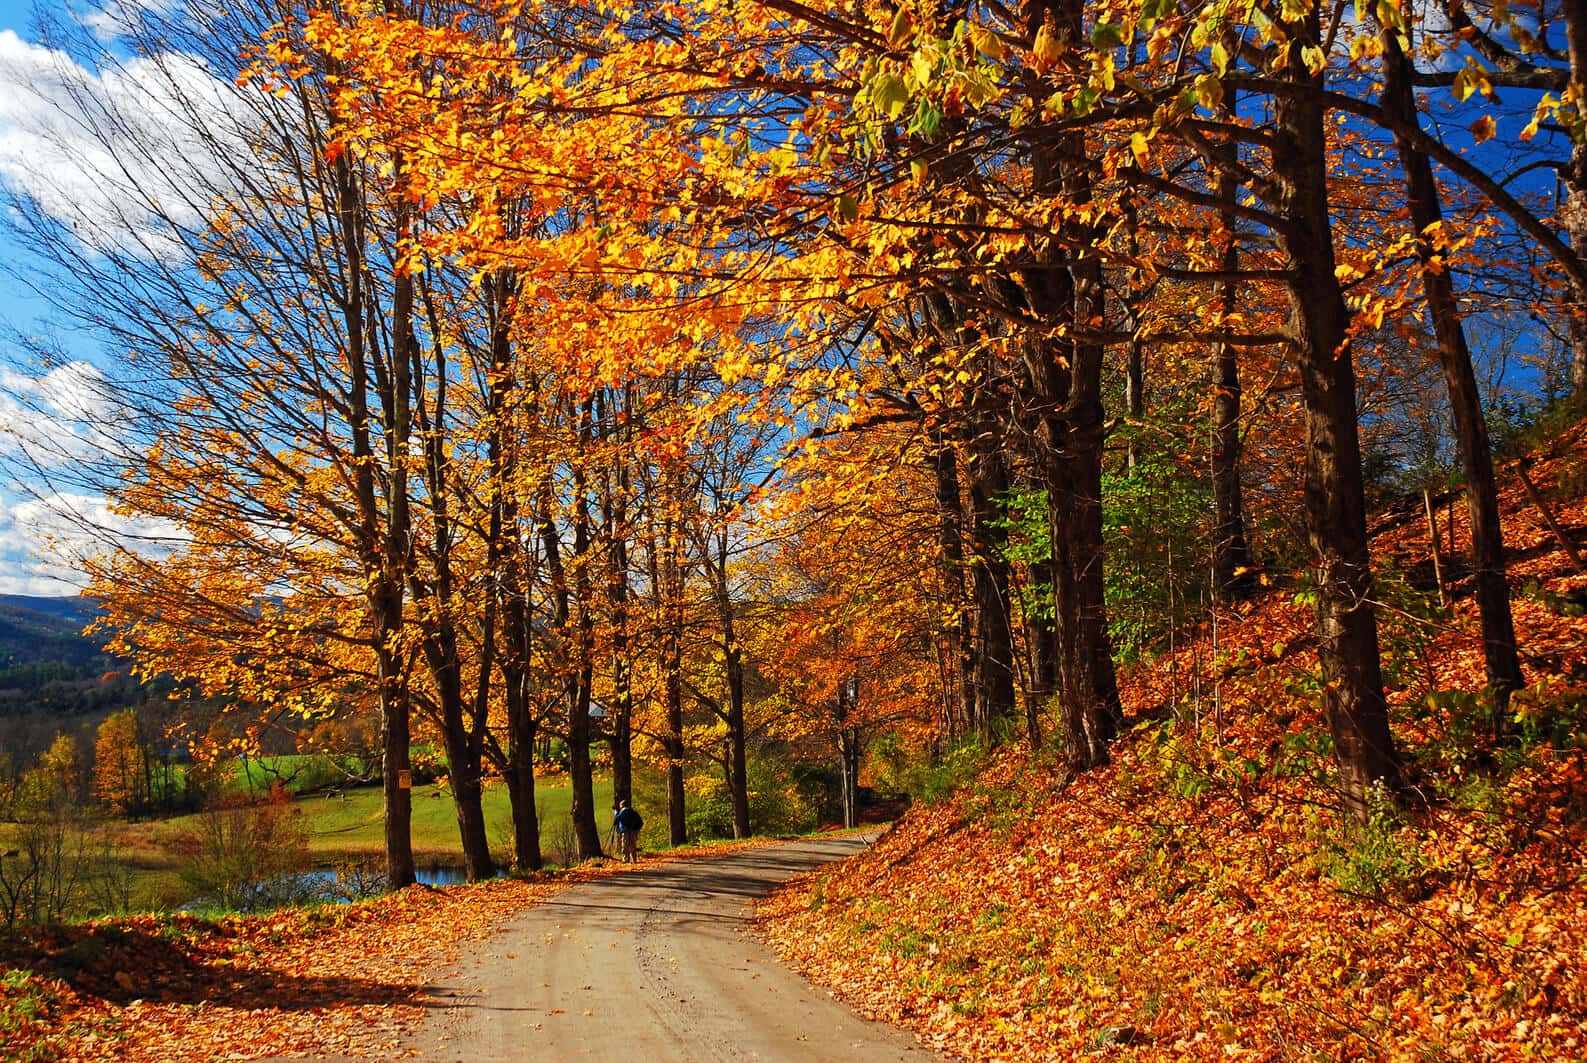 Fall Foliage Tour Historic Hudson Valley Exclusive Vacations